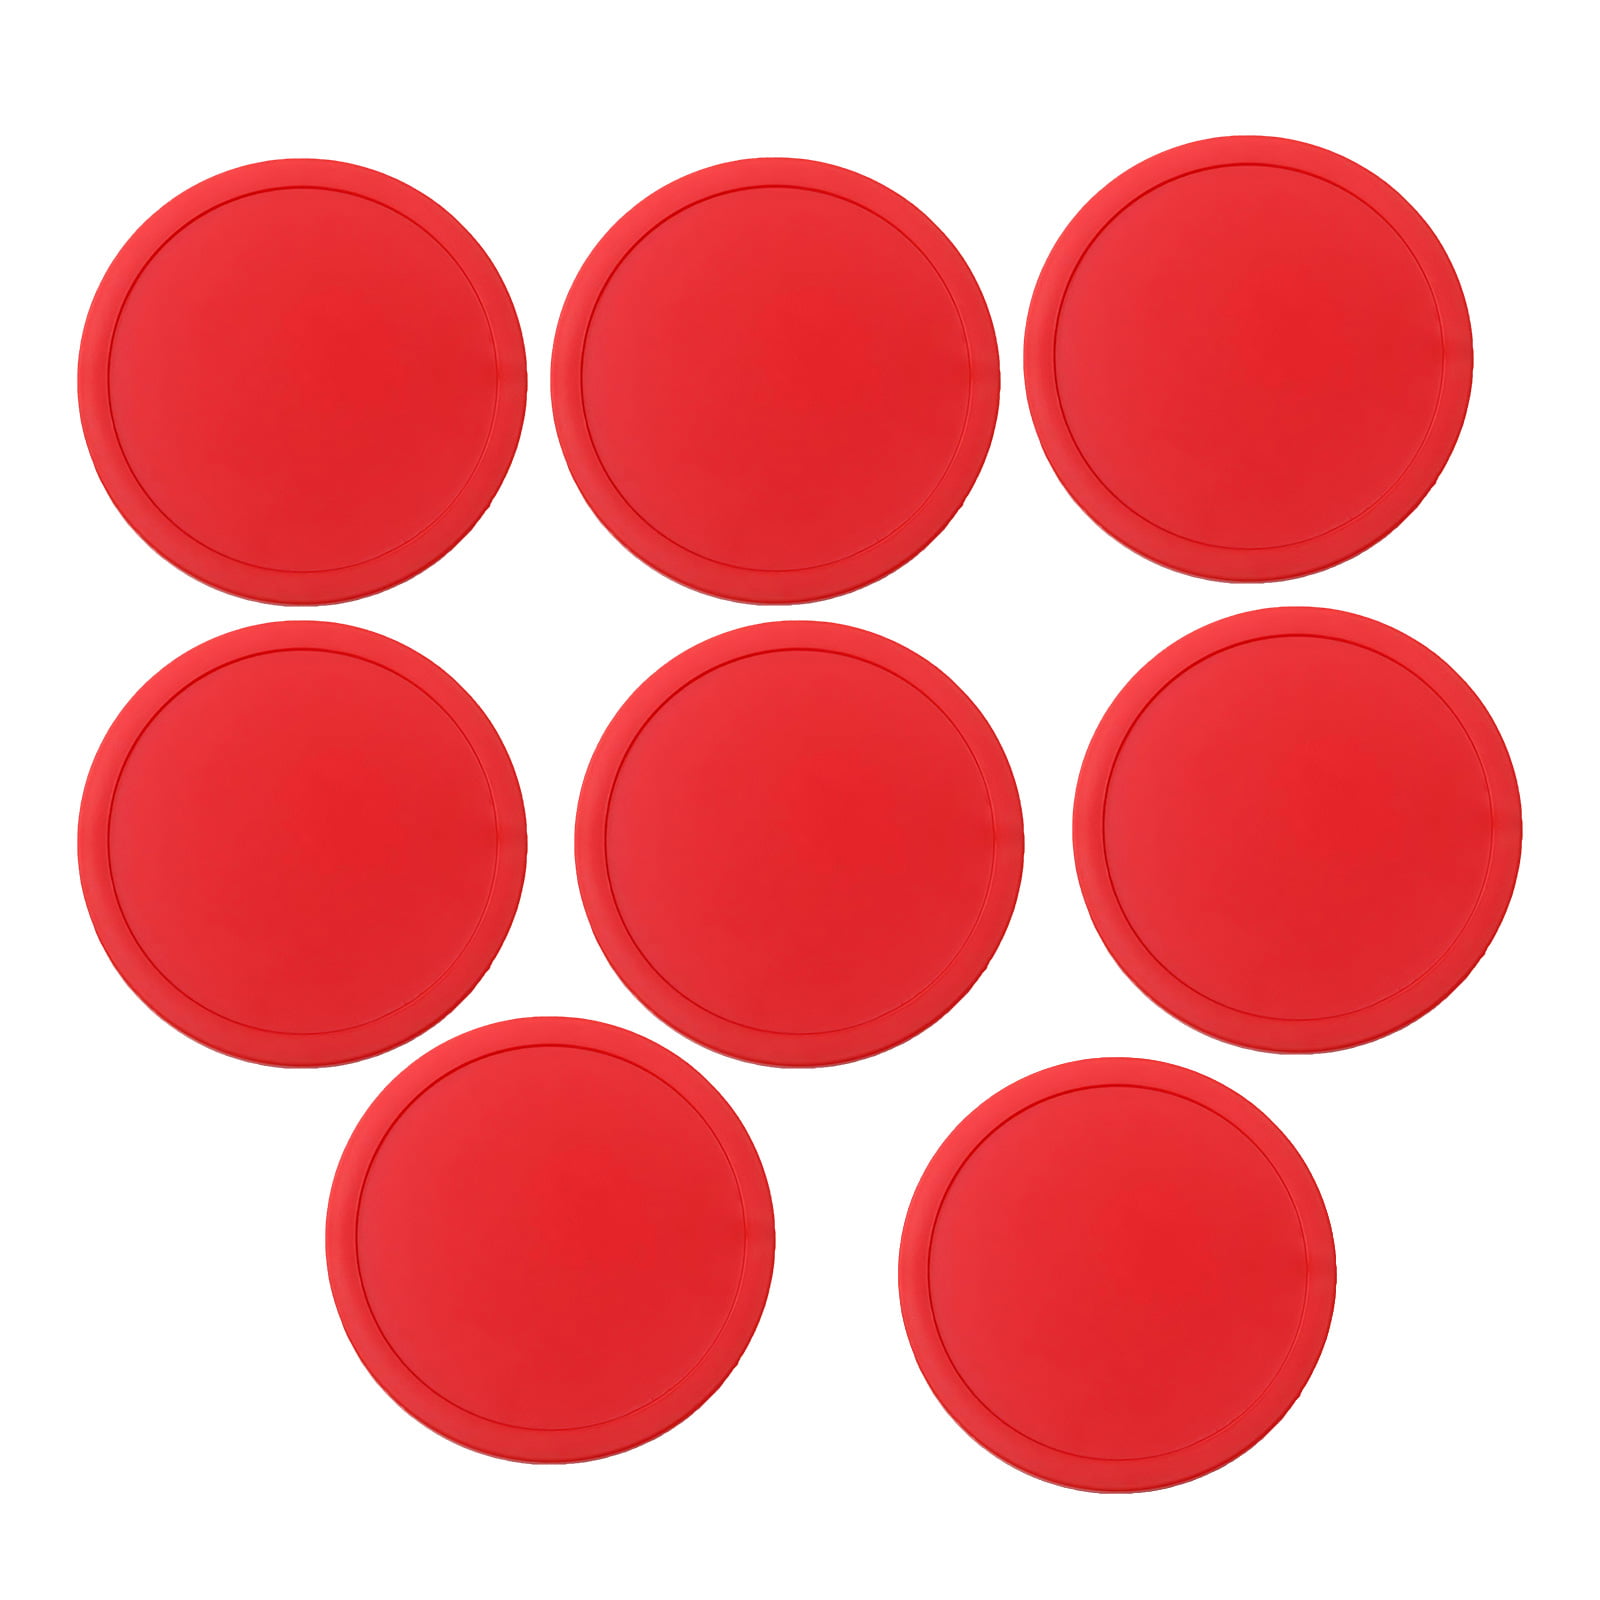 Home Air Hockey Red Replacement 2.5" Pucks for Game Tables Equipment 4 Pack 